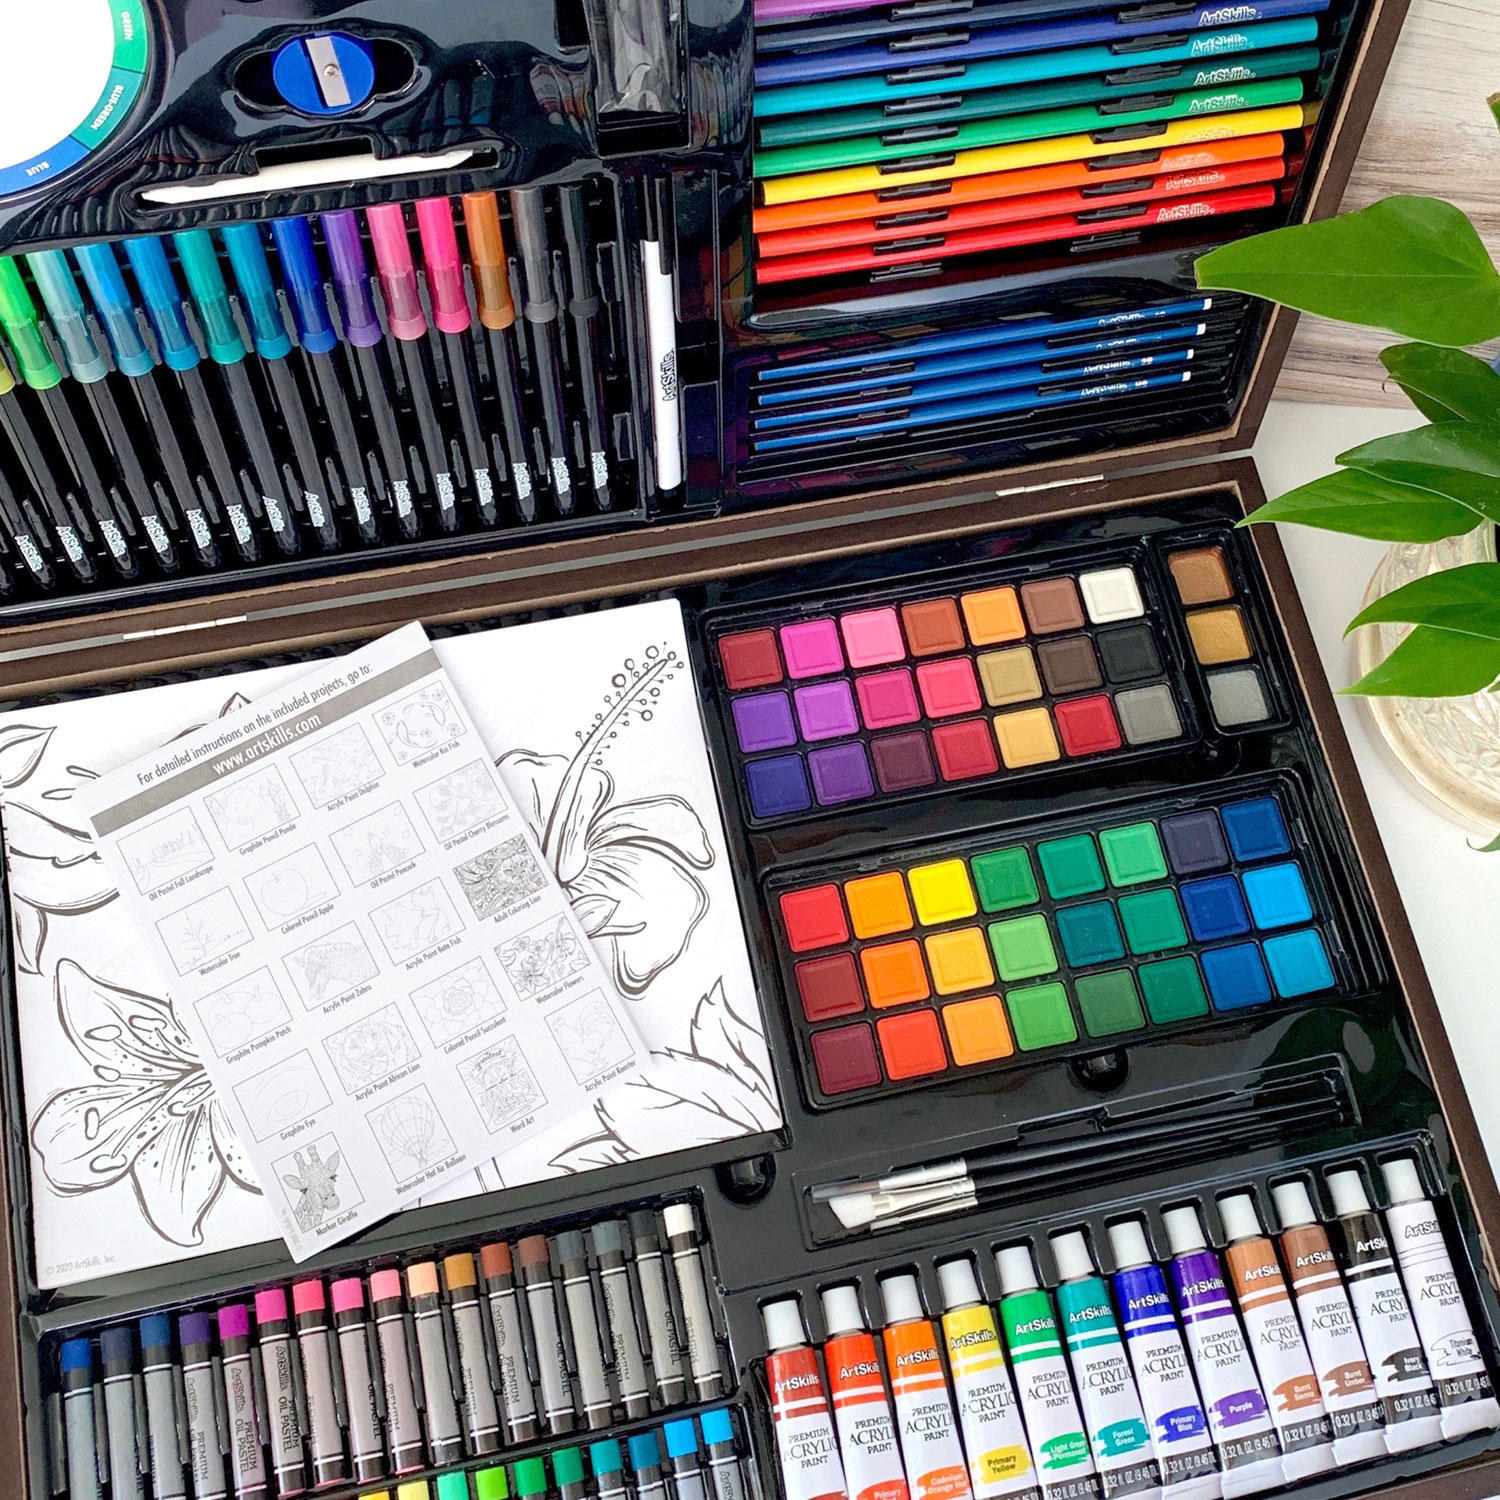 Top down shot of art kit showing colorful paints and drawings inside